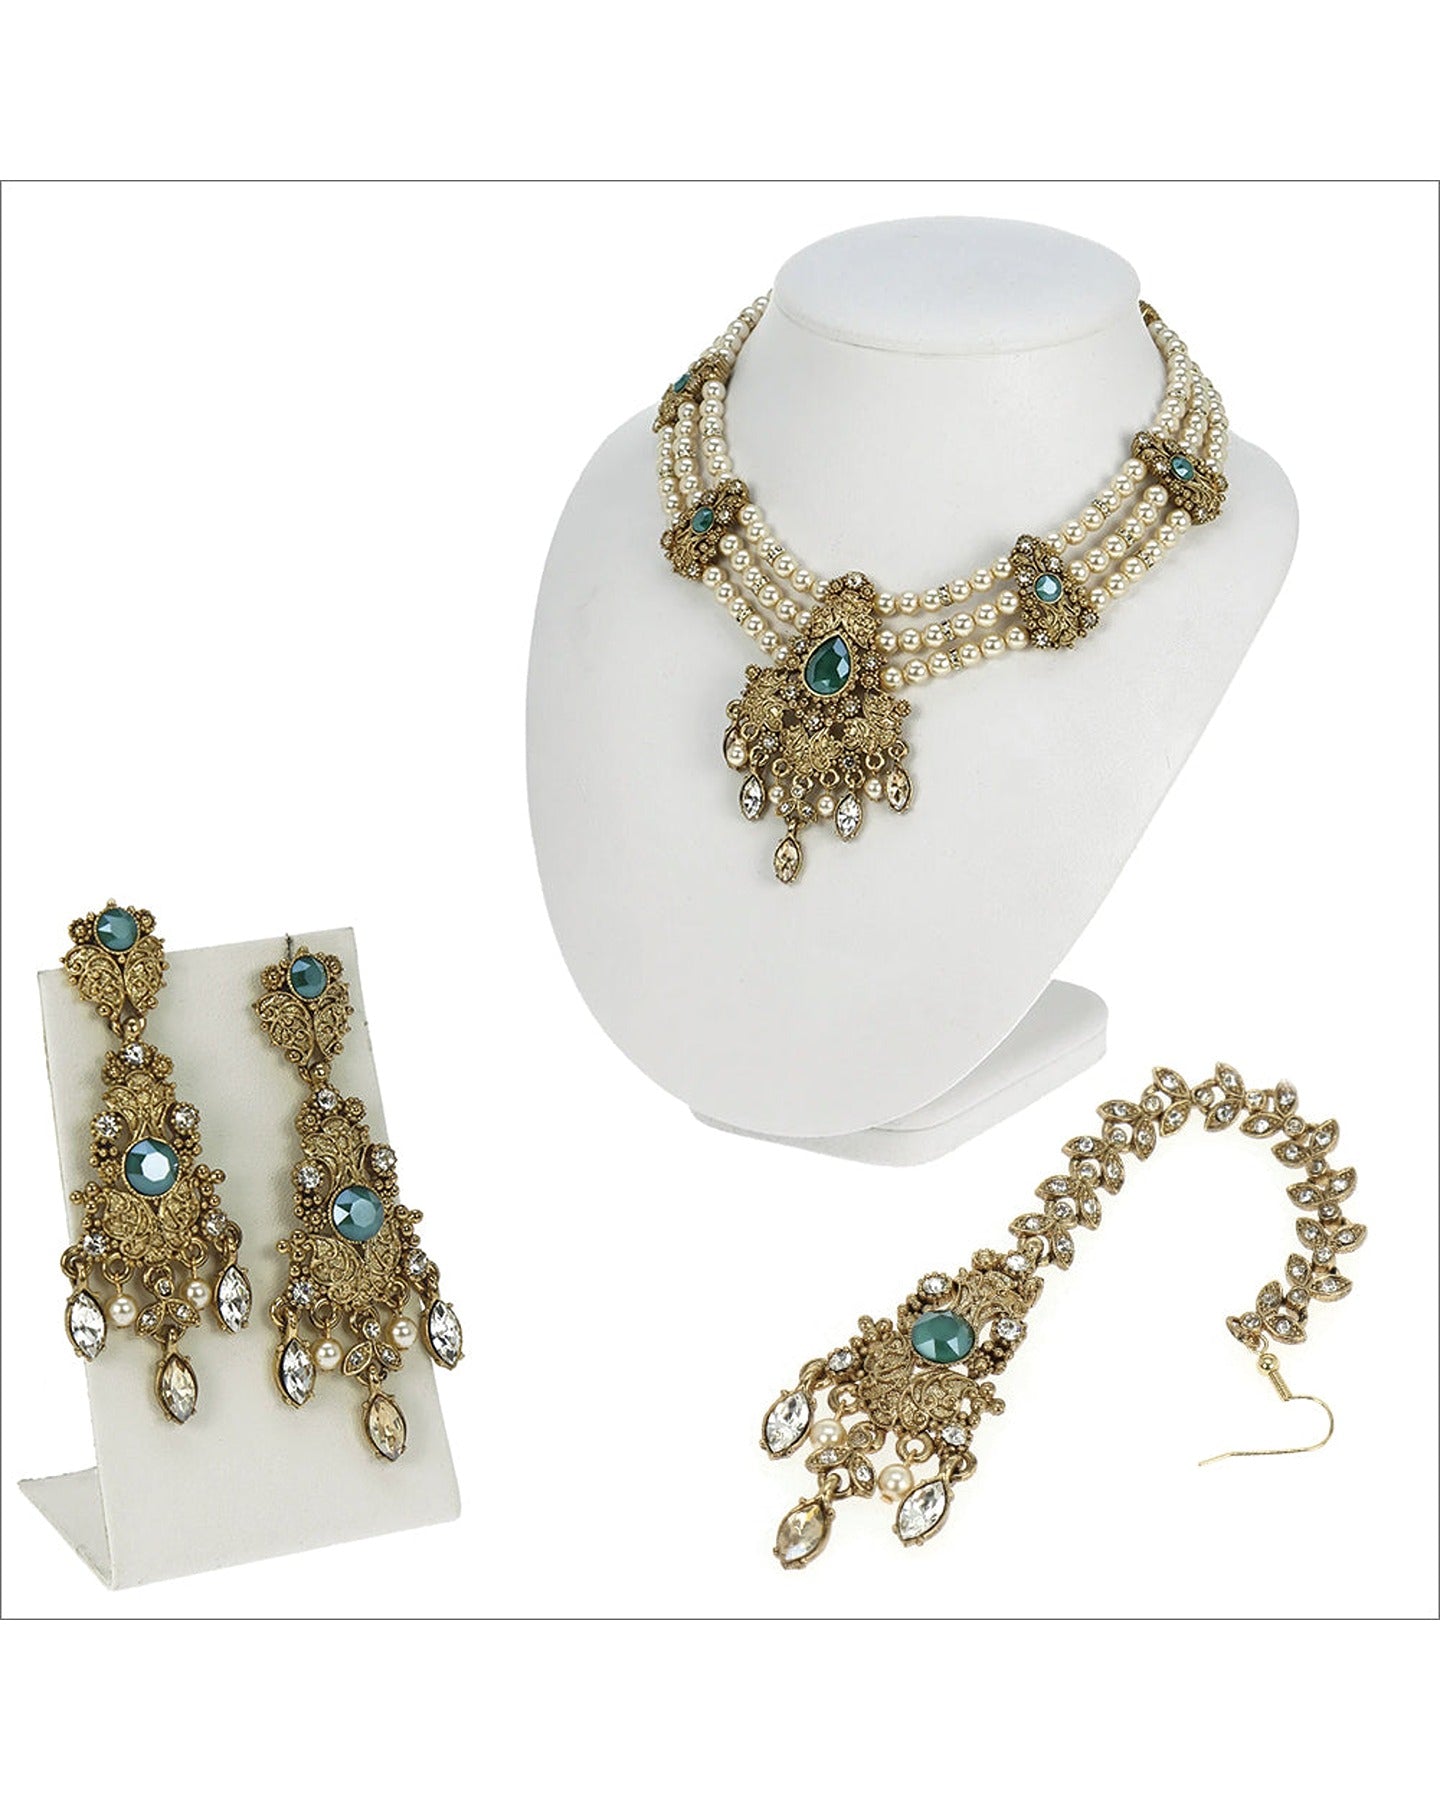 Antique Gold Jewelry with Royal Green Bead and Crystal Accents